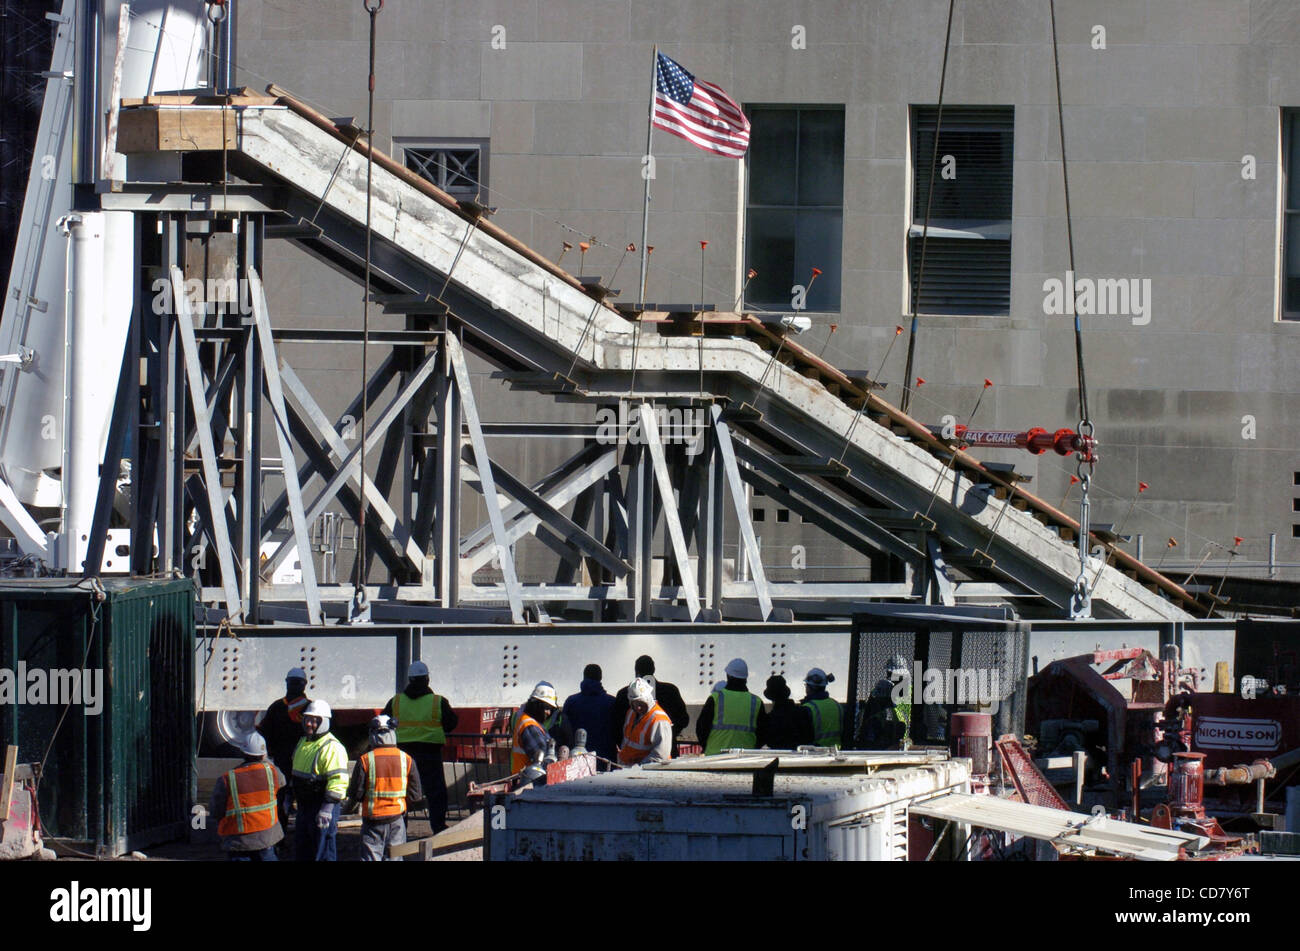 The historic Vesey Street Stair Remnant, known as the Survivors' Stairway, is moved to a temporary storage area at the World Trade Center site in preparation for its eventual placement in the National September 11 Memorial Museum. The Survivors' Stairway is the sole vestige above ground of the World Stock Photo